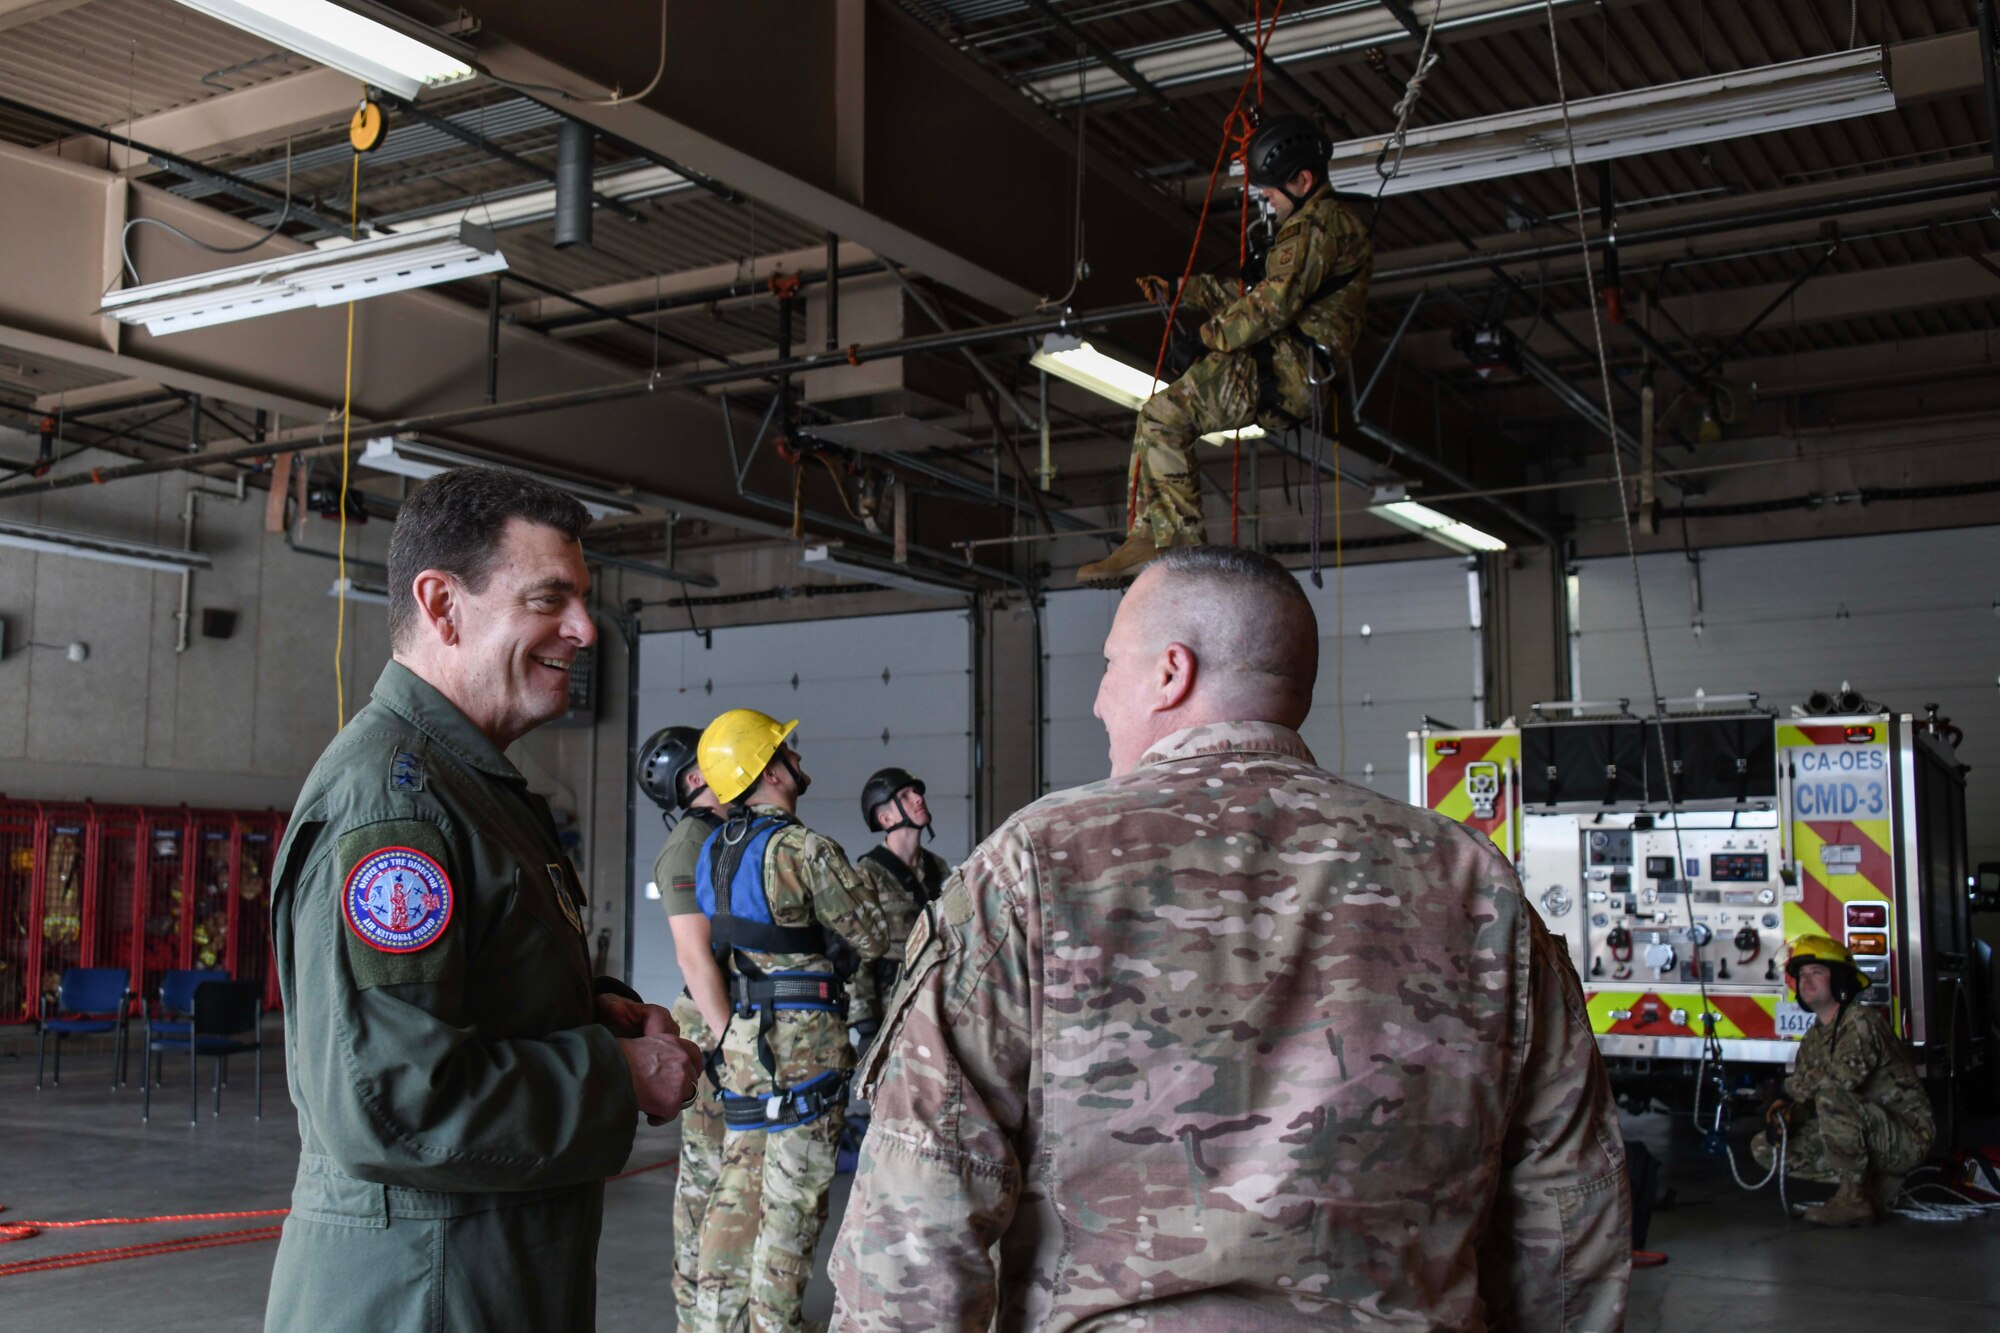 In the foreground, on the left, a man in a green military flight suit speaks to a man in a military camouflage uniform in front of firefighters doing a hanging drill